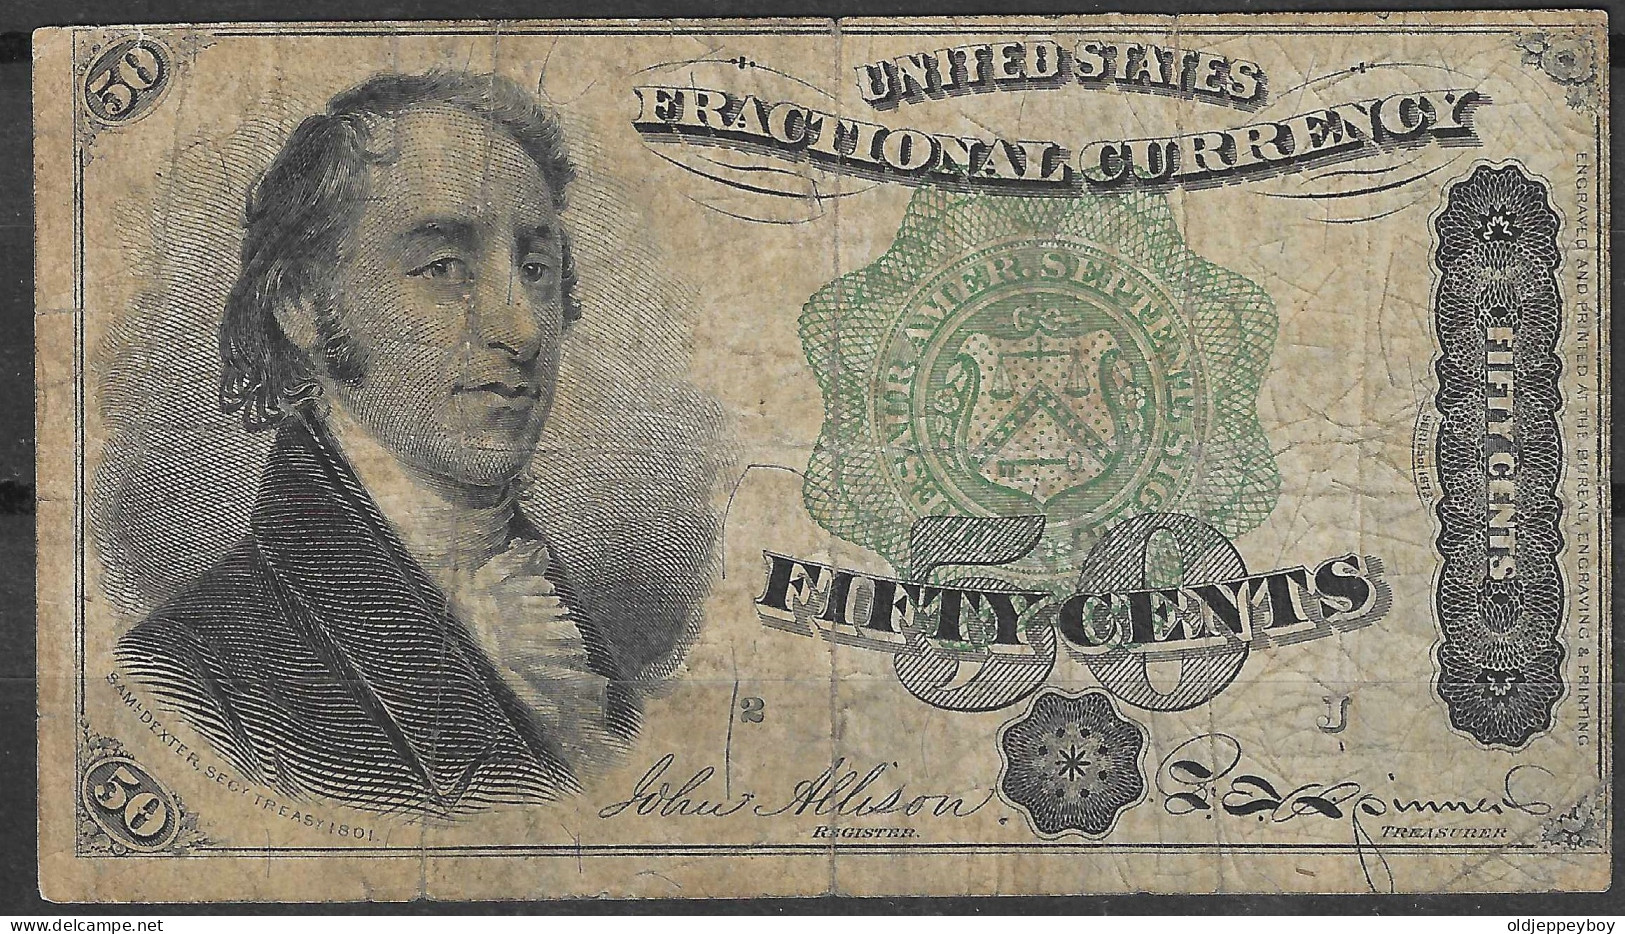 1869 Usa U.s.a. UNITED STATES OF AMERICA  50 Cent Fourth Issue Fractional Currency Note Green Seal FR#1379 - 1874-1875 : 5 Uitgift